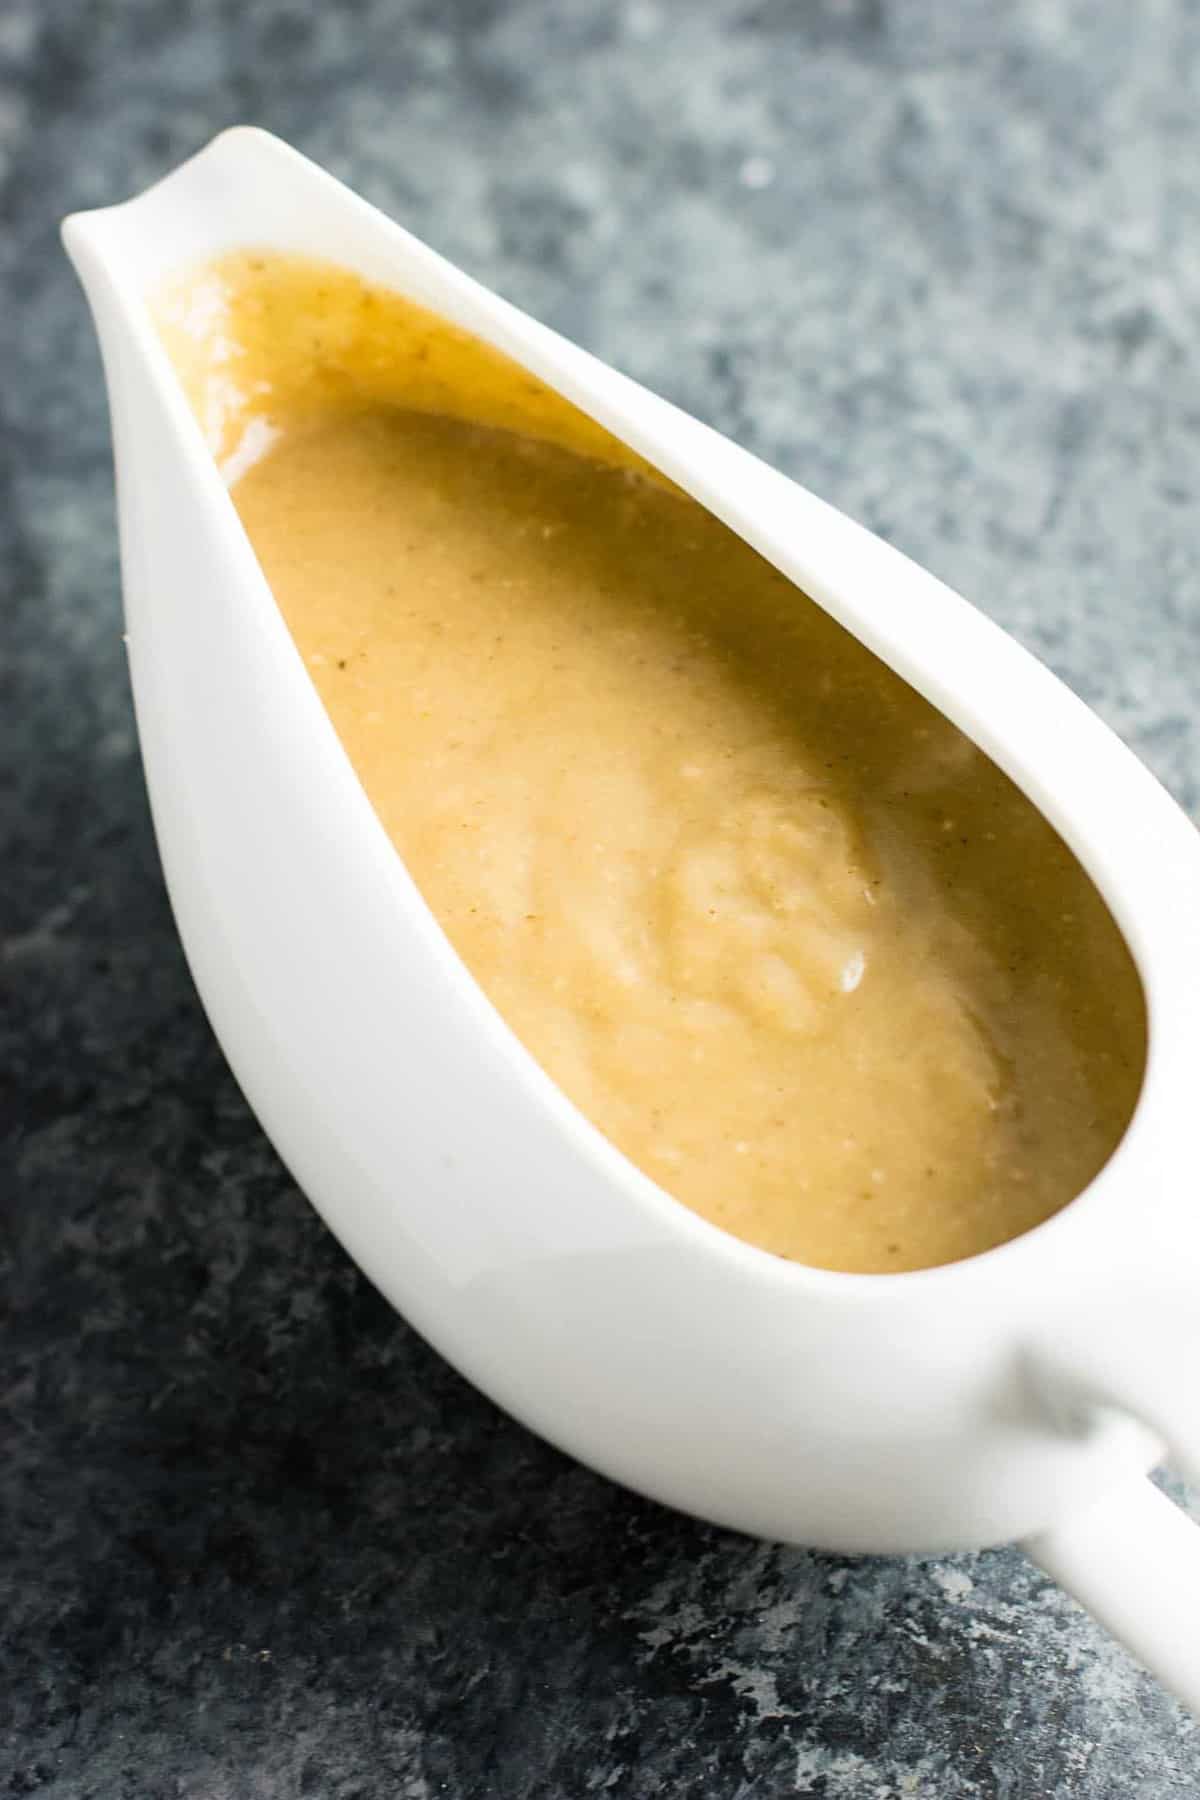 vegetarian thanksgiving menu - How to make vegetarian gravy - this is the BEST gravy I have ever had, with or without meat! Seriously incredible and everyone will be wanting some at Thanksgiving! #gravy #vegetarian #mushroomgravy #vegan #vegetarianthanksgiving